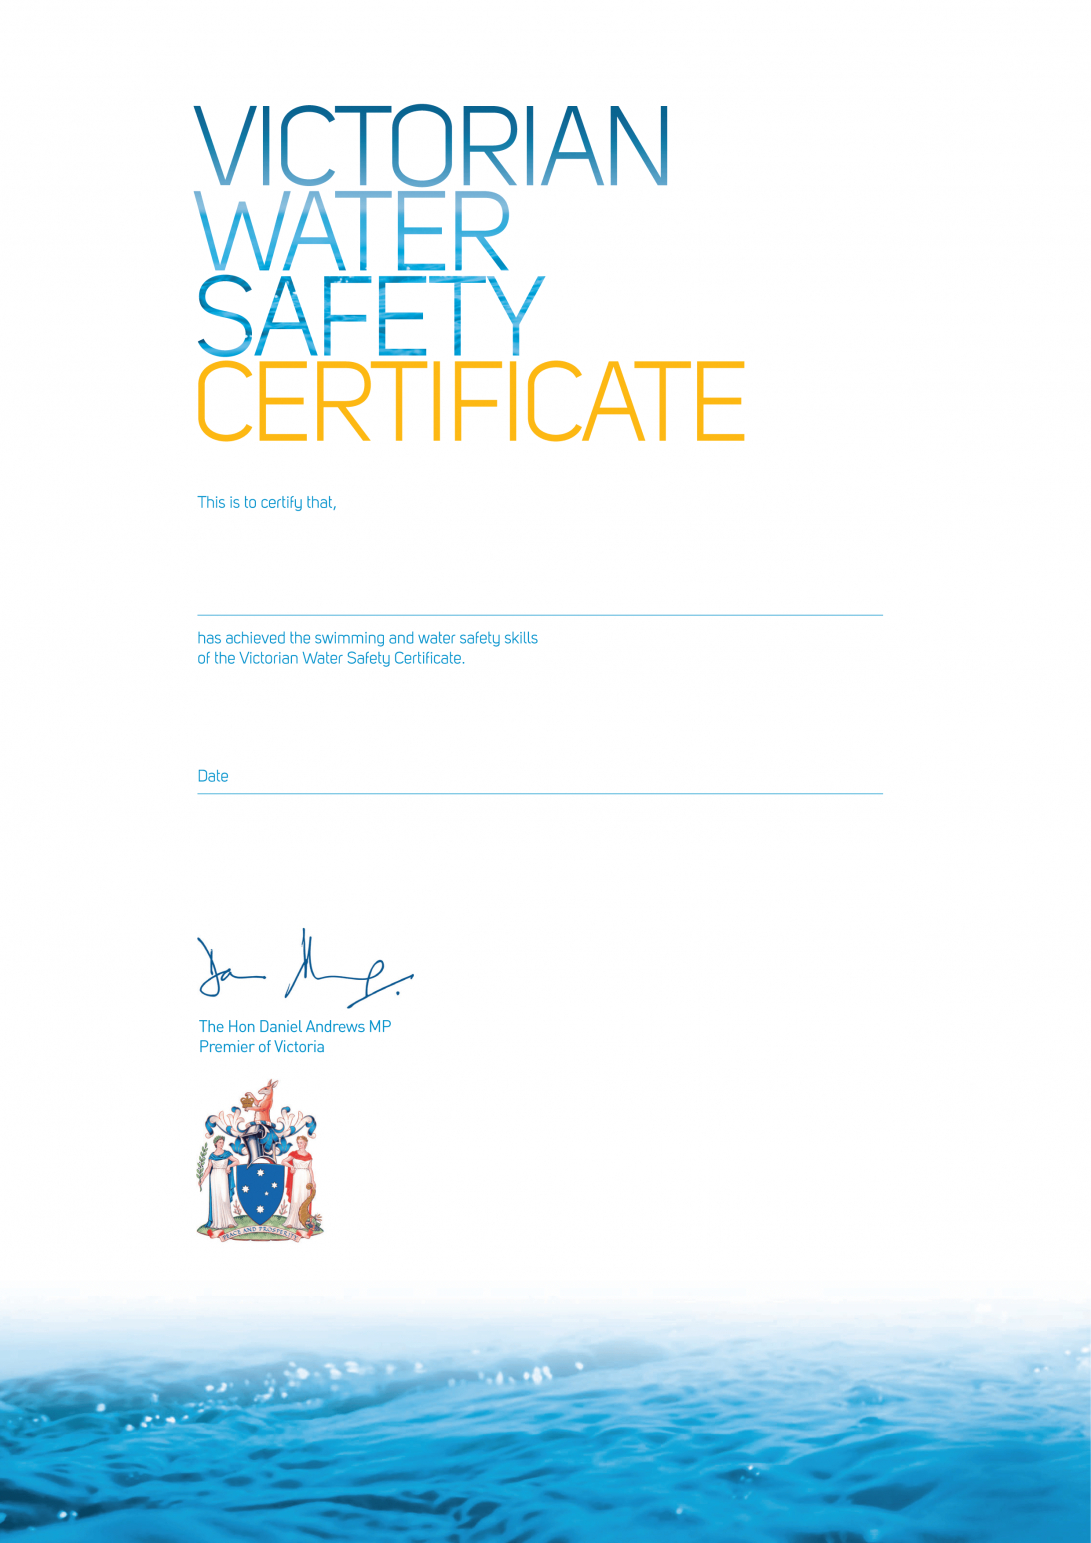 Certificate Templates For Swimming Awards 3 Ways To Make For Life Saving Award Certificate Template